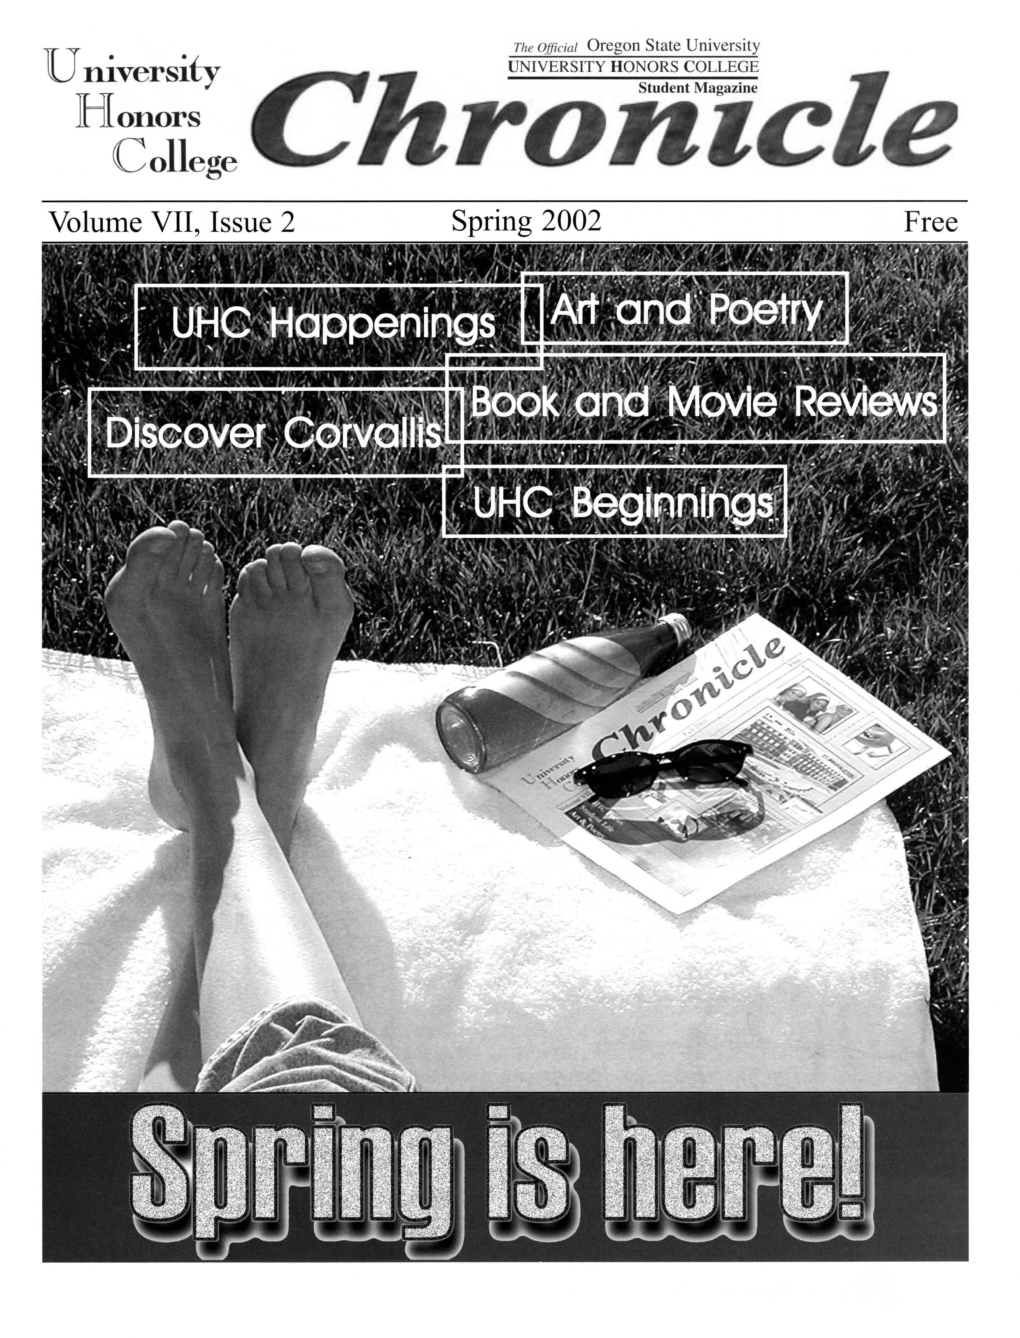 Universiiy UNIVERSITY HONORS COLLEGE H00 Student Magazine College Ronide Volume VII, Issue 2 Spring 2002 Free Chronicle The